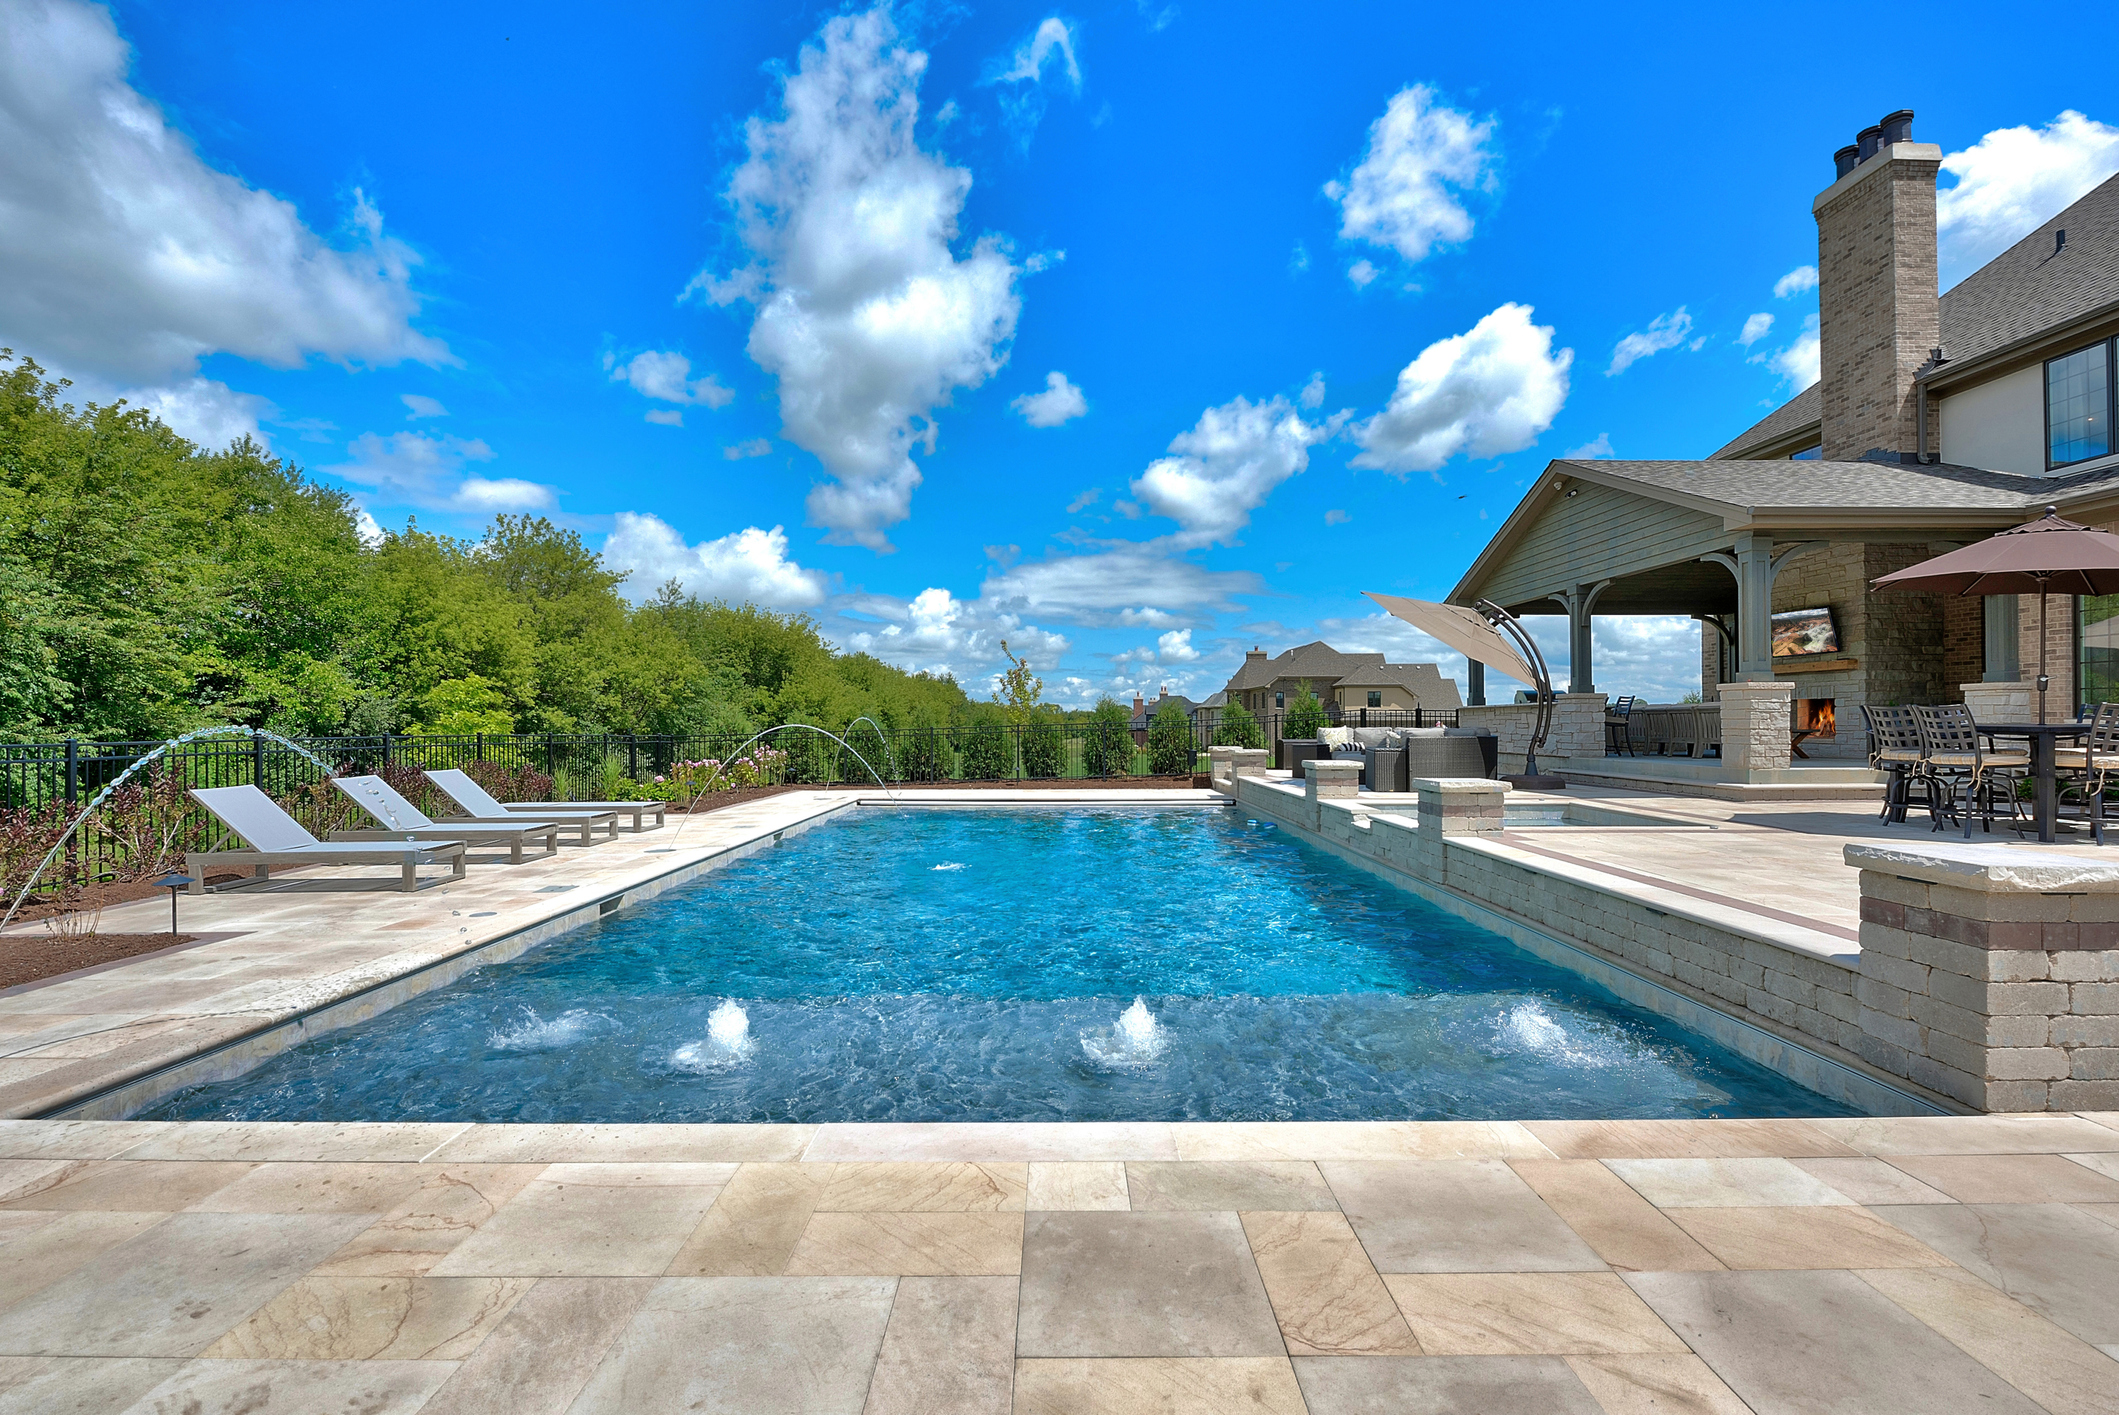 5 Steps to Make a Swimming Pool a Luxury Pool